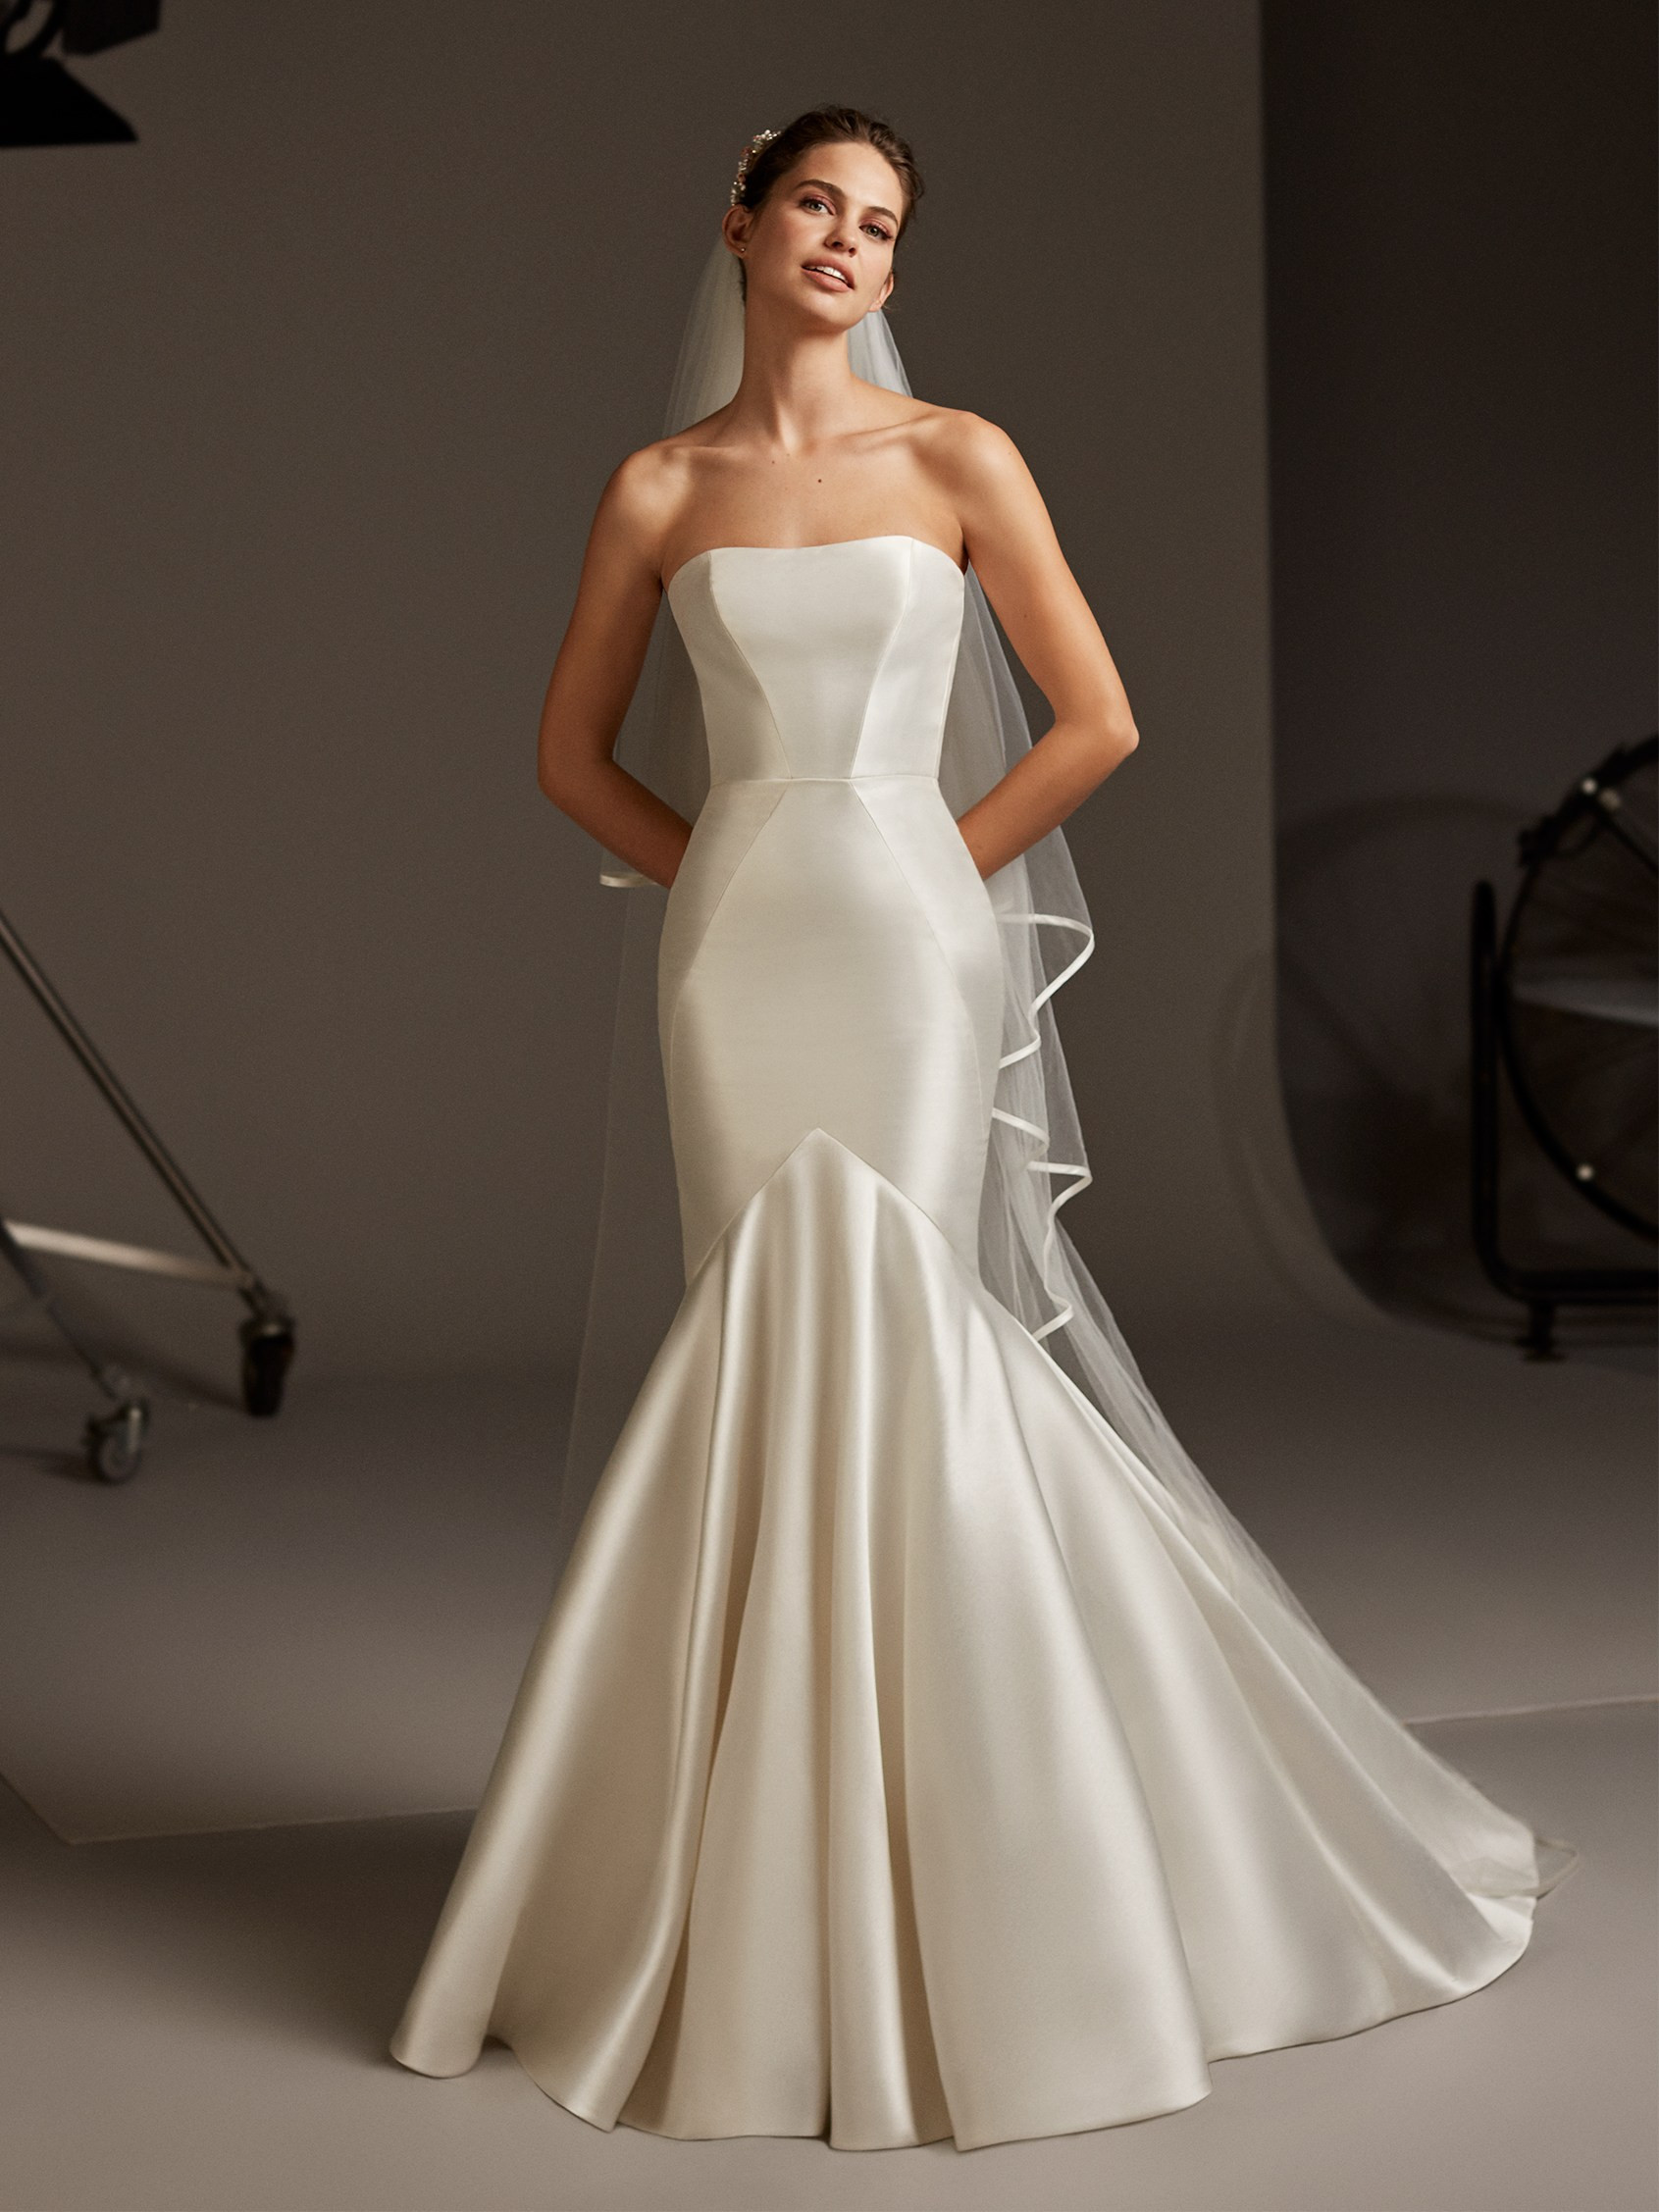 Strapless Wedding Dresses Top Review strapless wedding dresses - Find ...